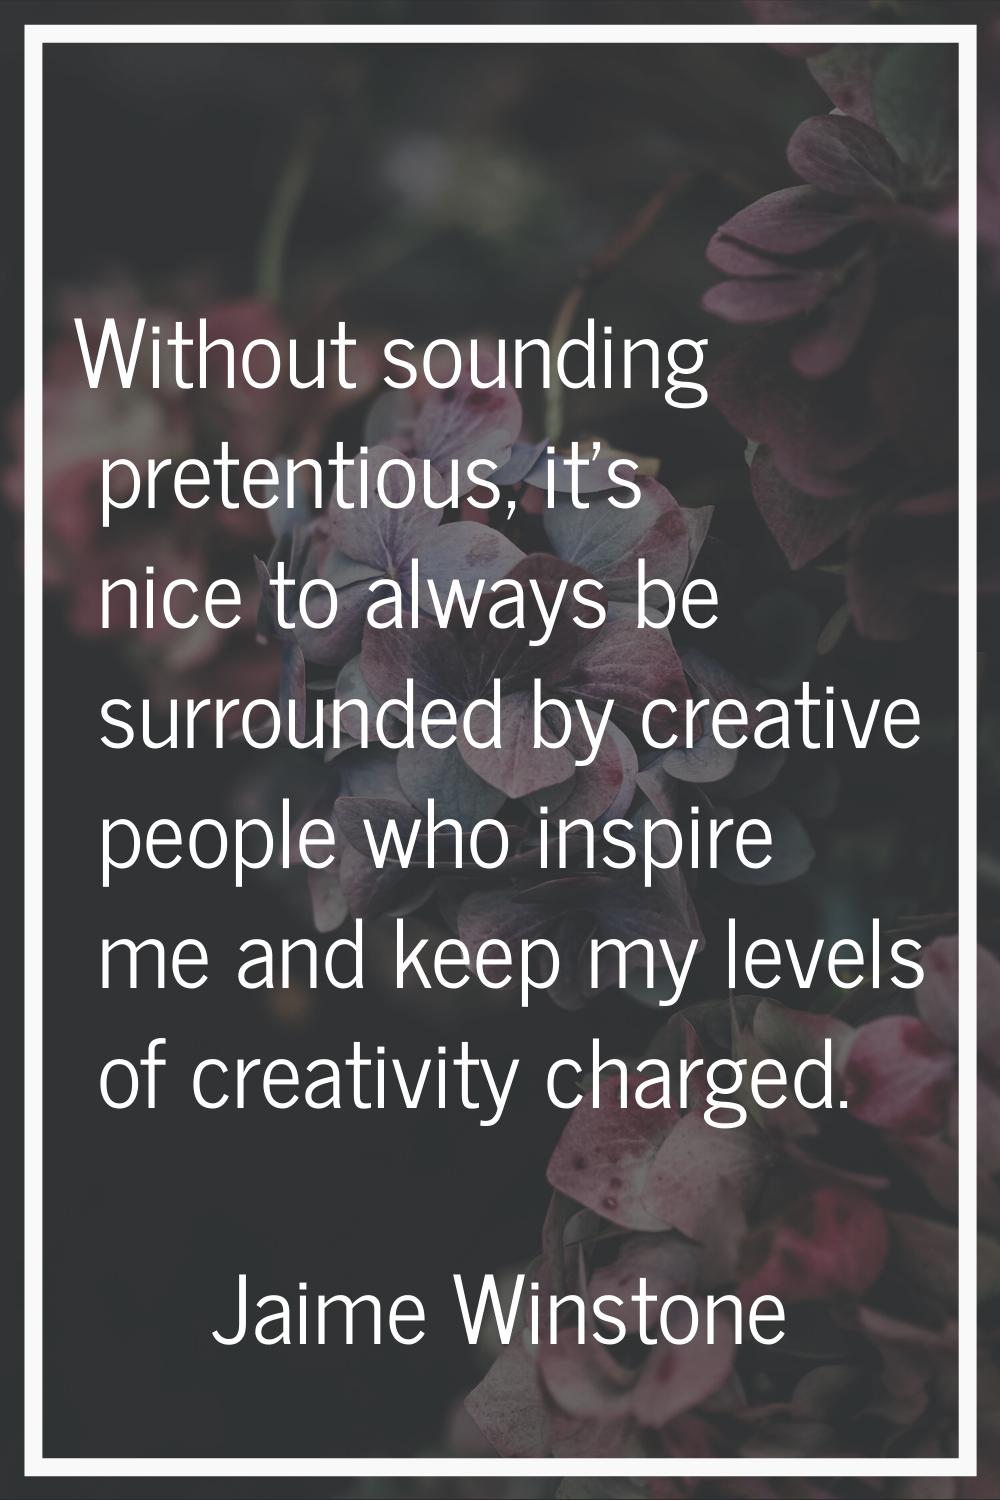 Without sounding pretentious, it's nice to always be surrounded by creative people who inspire me a